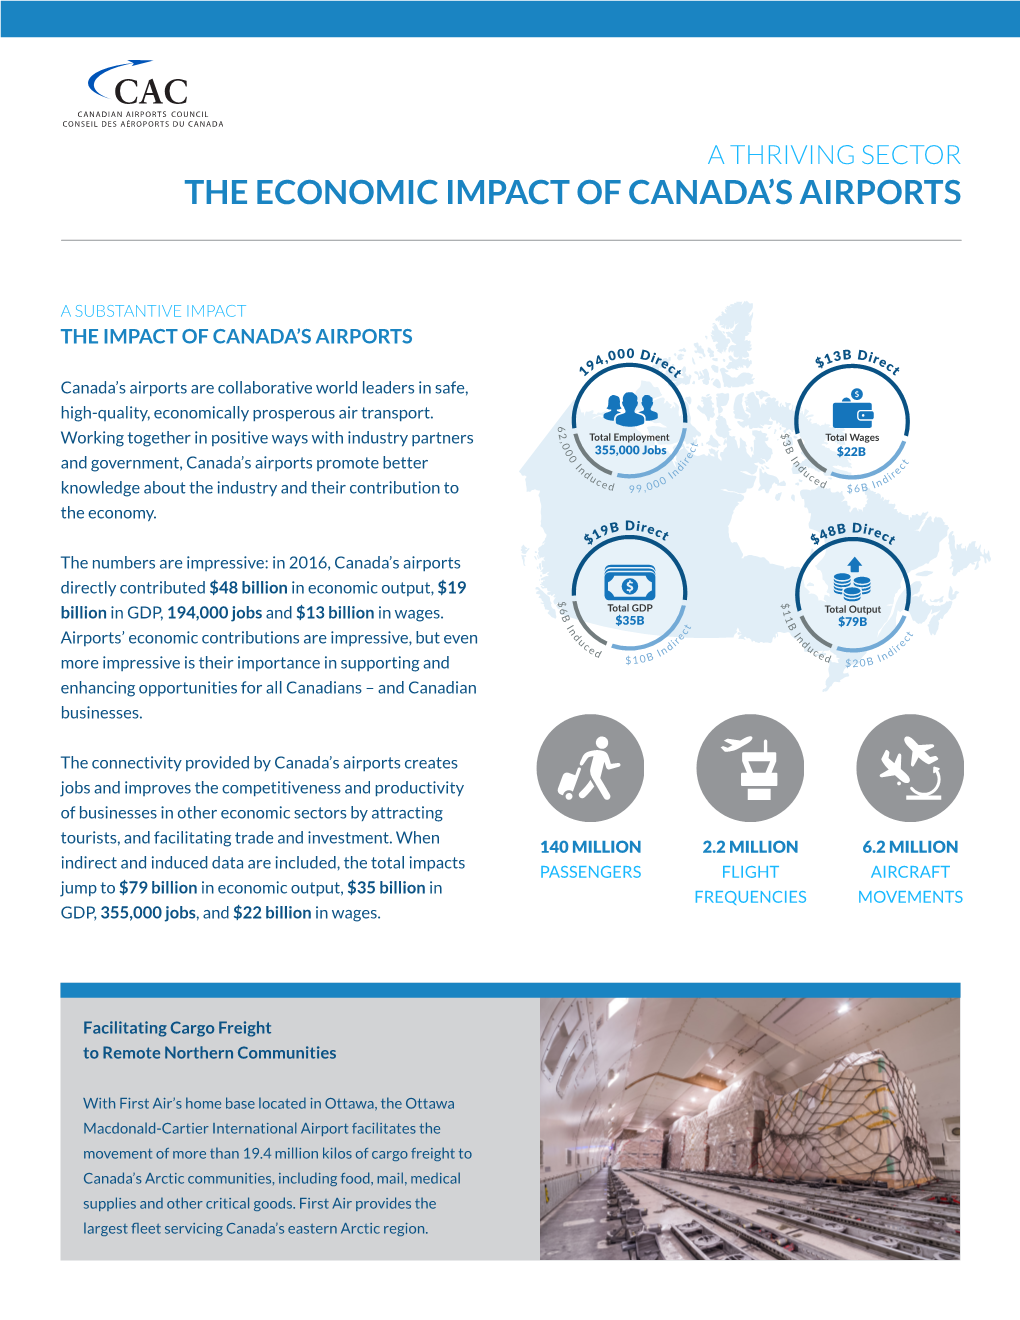 The Economic Impact of Canada's Airports